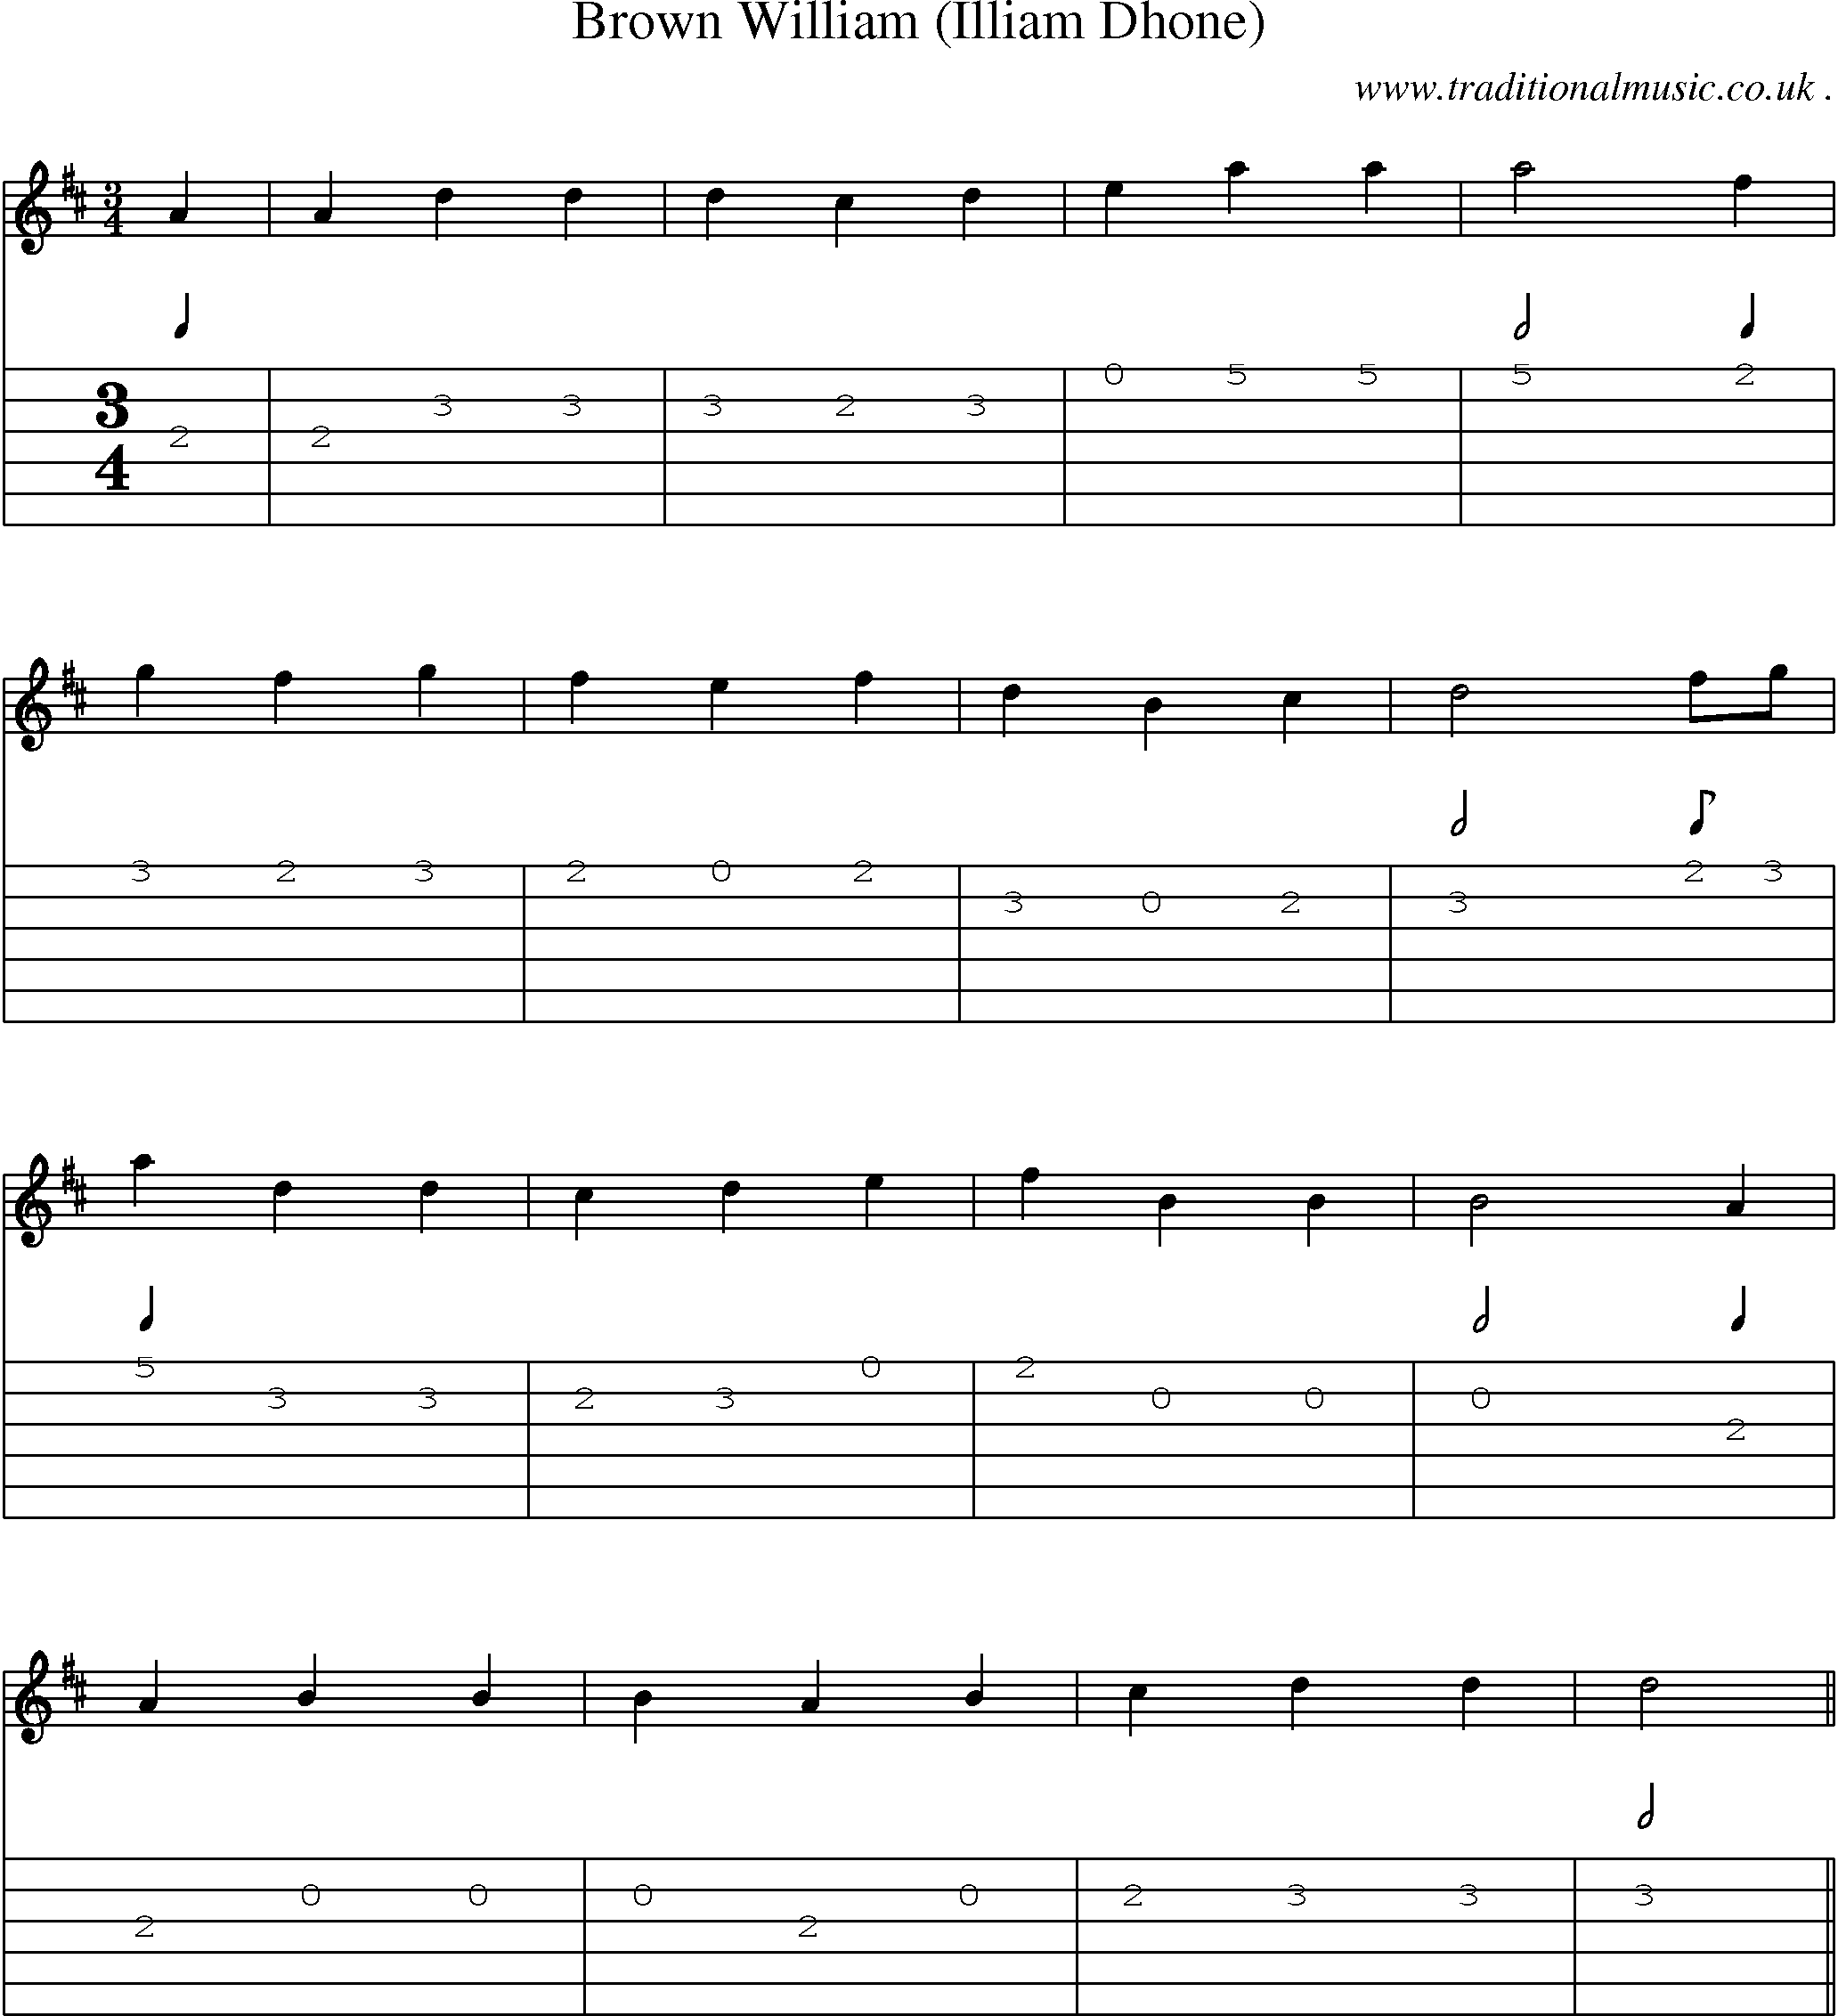 Sheet-Music and Guitar Tabs for Brown William (illiam Dhone)